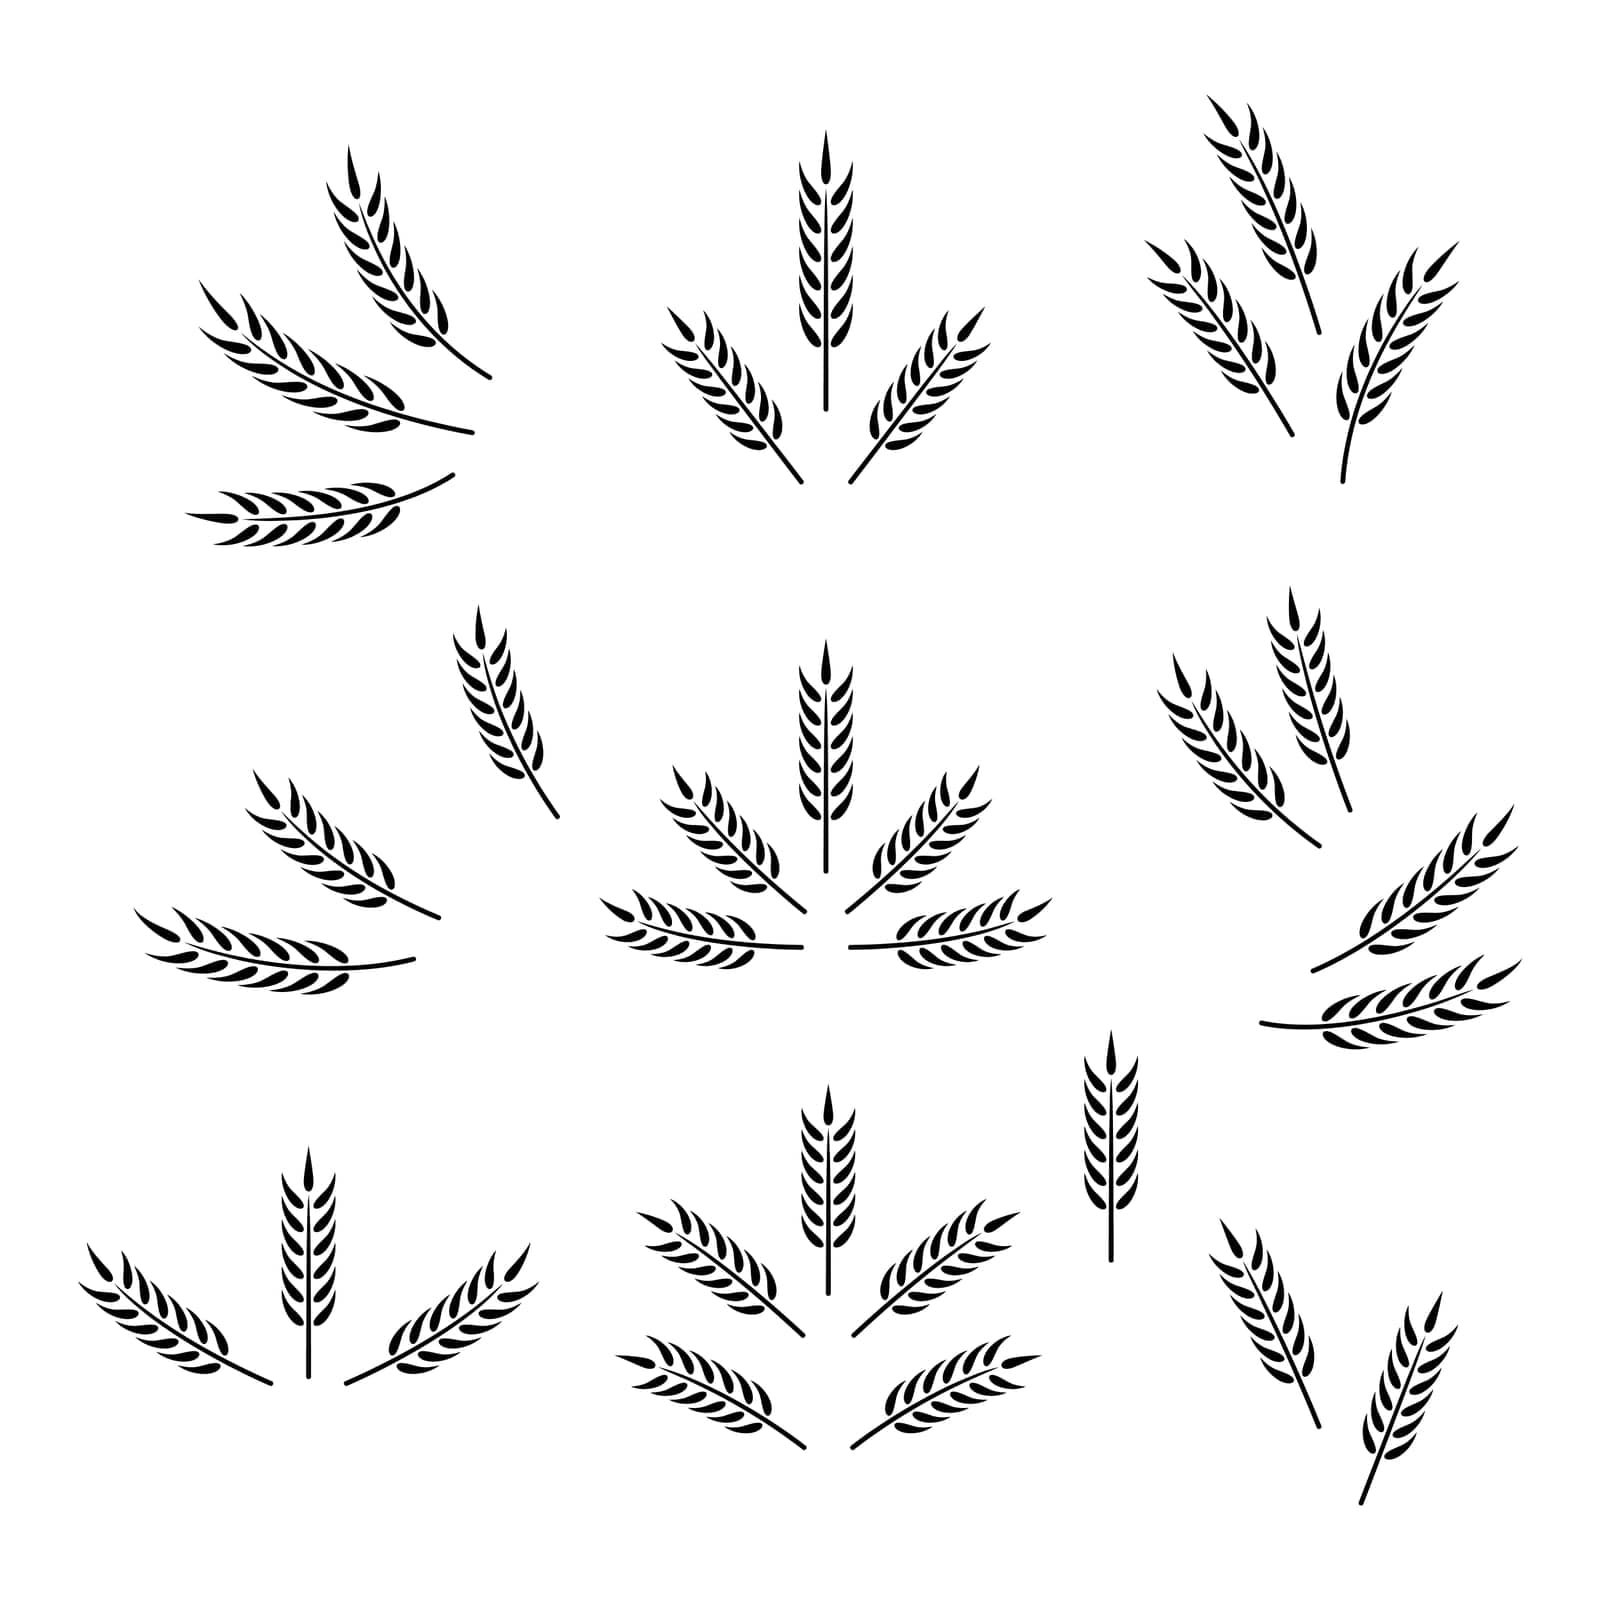 Flat Vector Agriculture Wheat Icon Set Isolated. Organic Wheat and Rice Ears. Design Template for Bread, Beer Logo, Packaging, Labels for Farming, Organic Produce, and Food Industry Concept by Gomolach